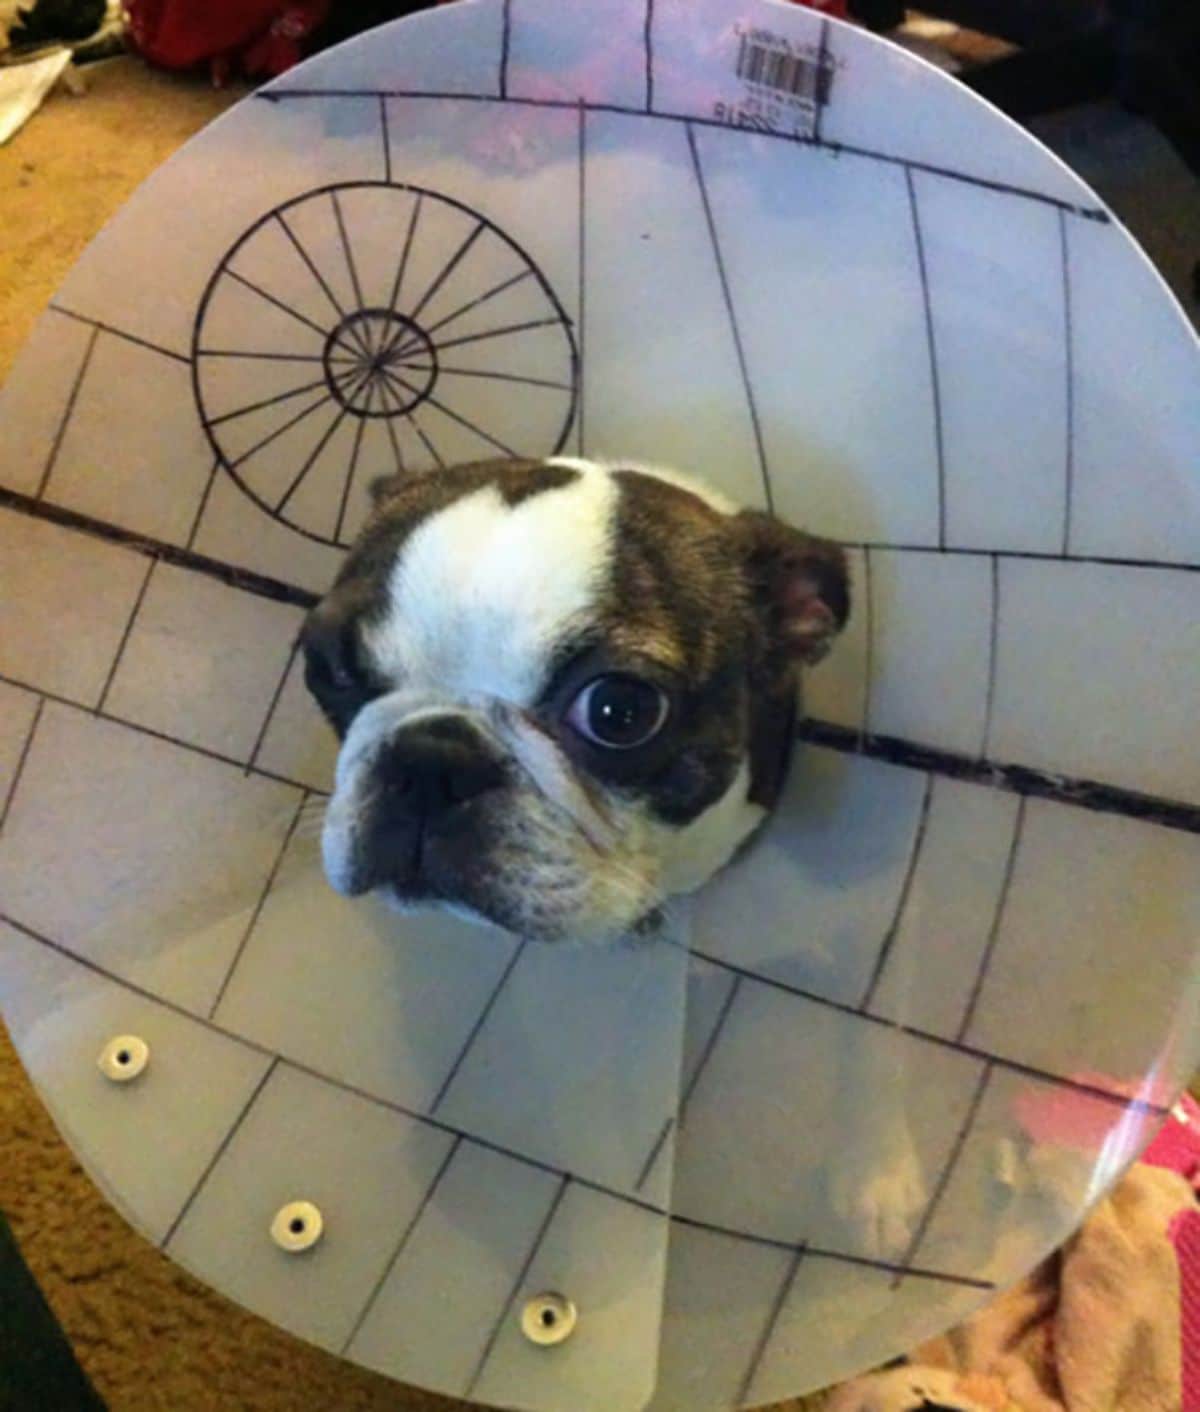 brown and white dog in a cone of shame coloured to look like the death star